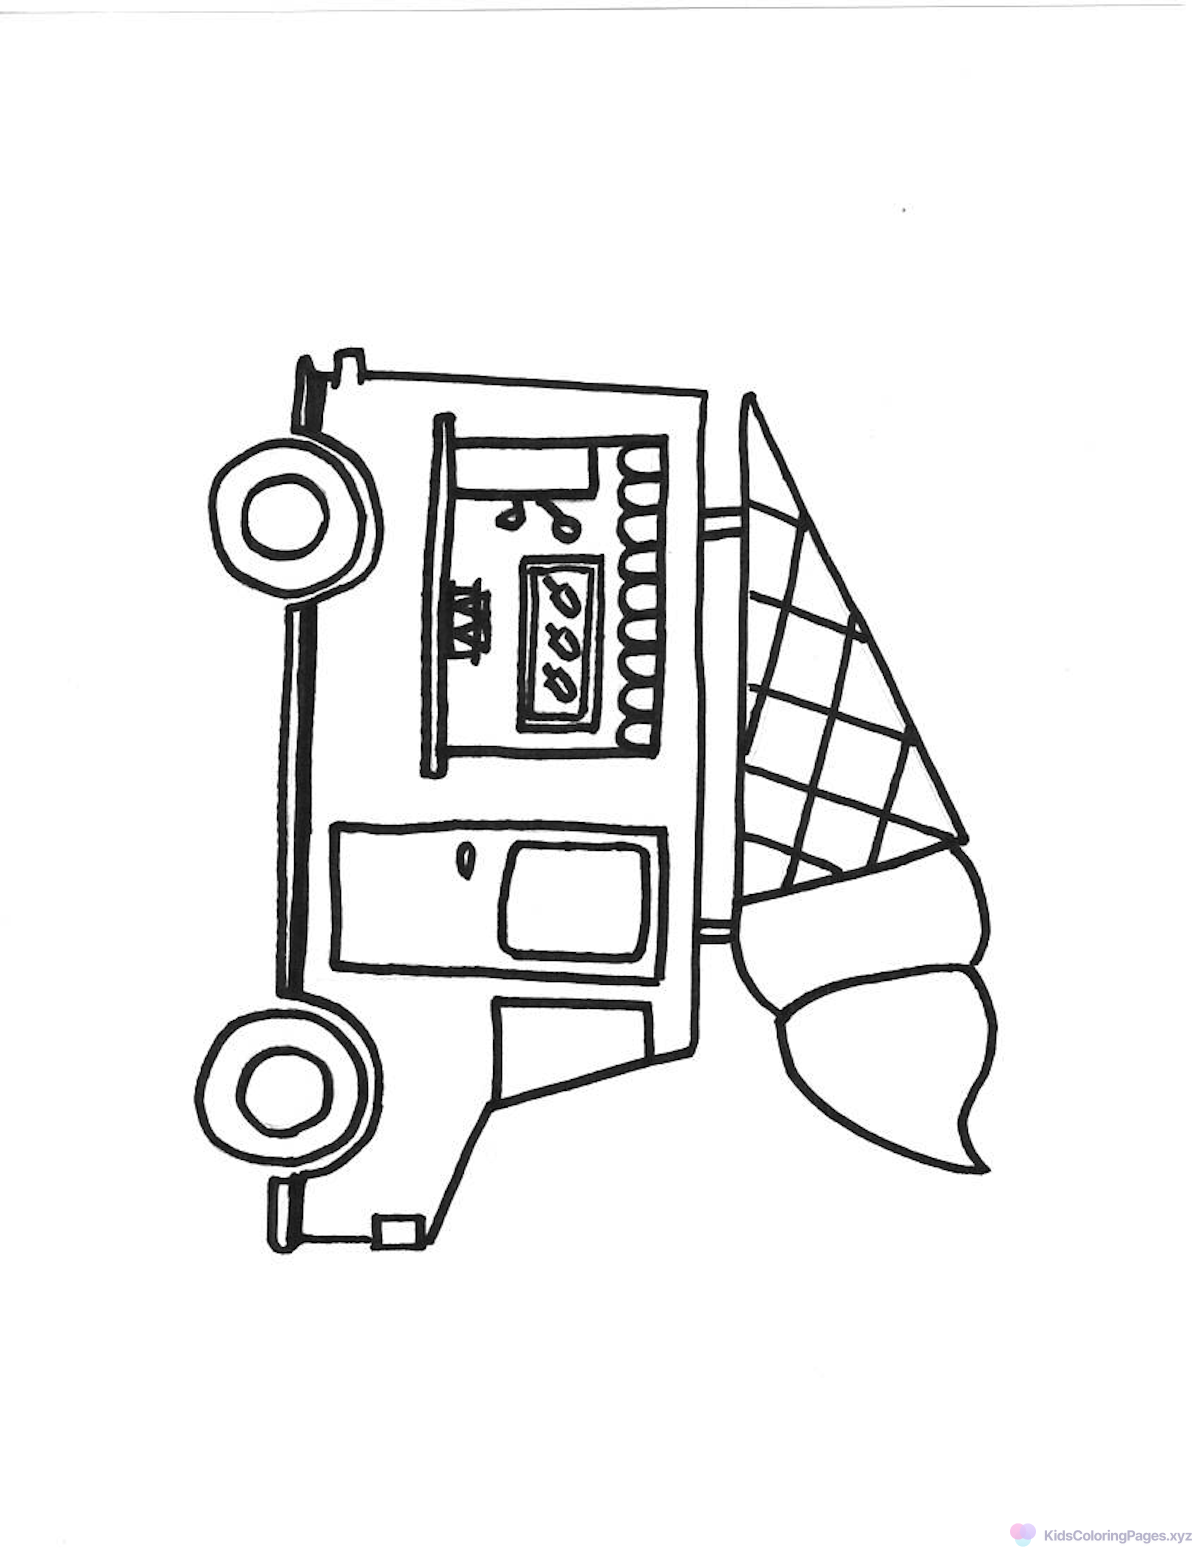 Ice Cream Truck coloring page for printing